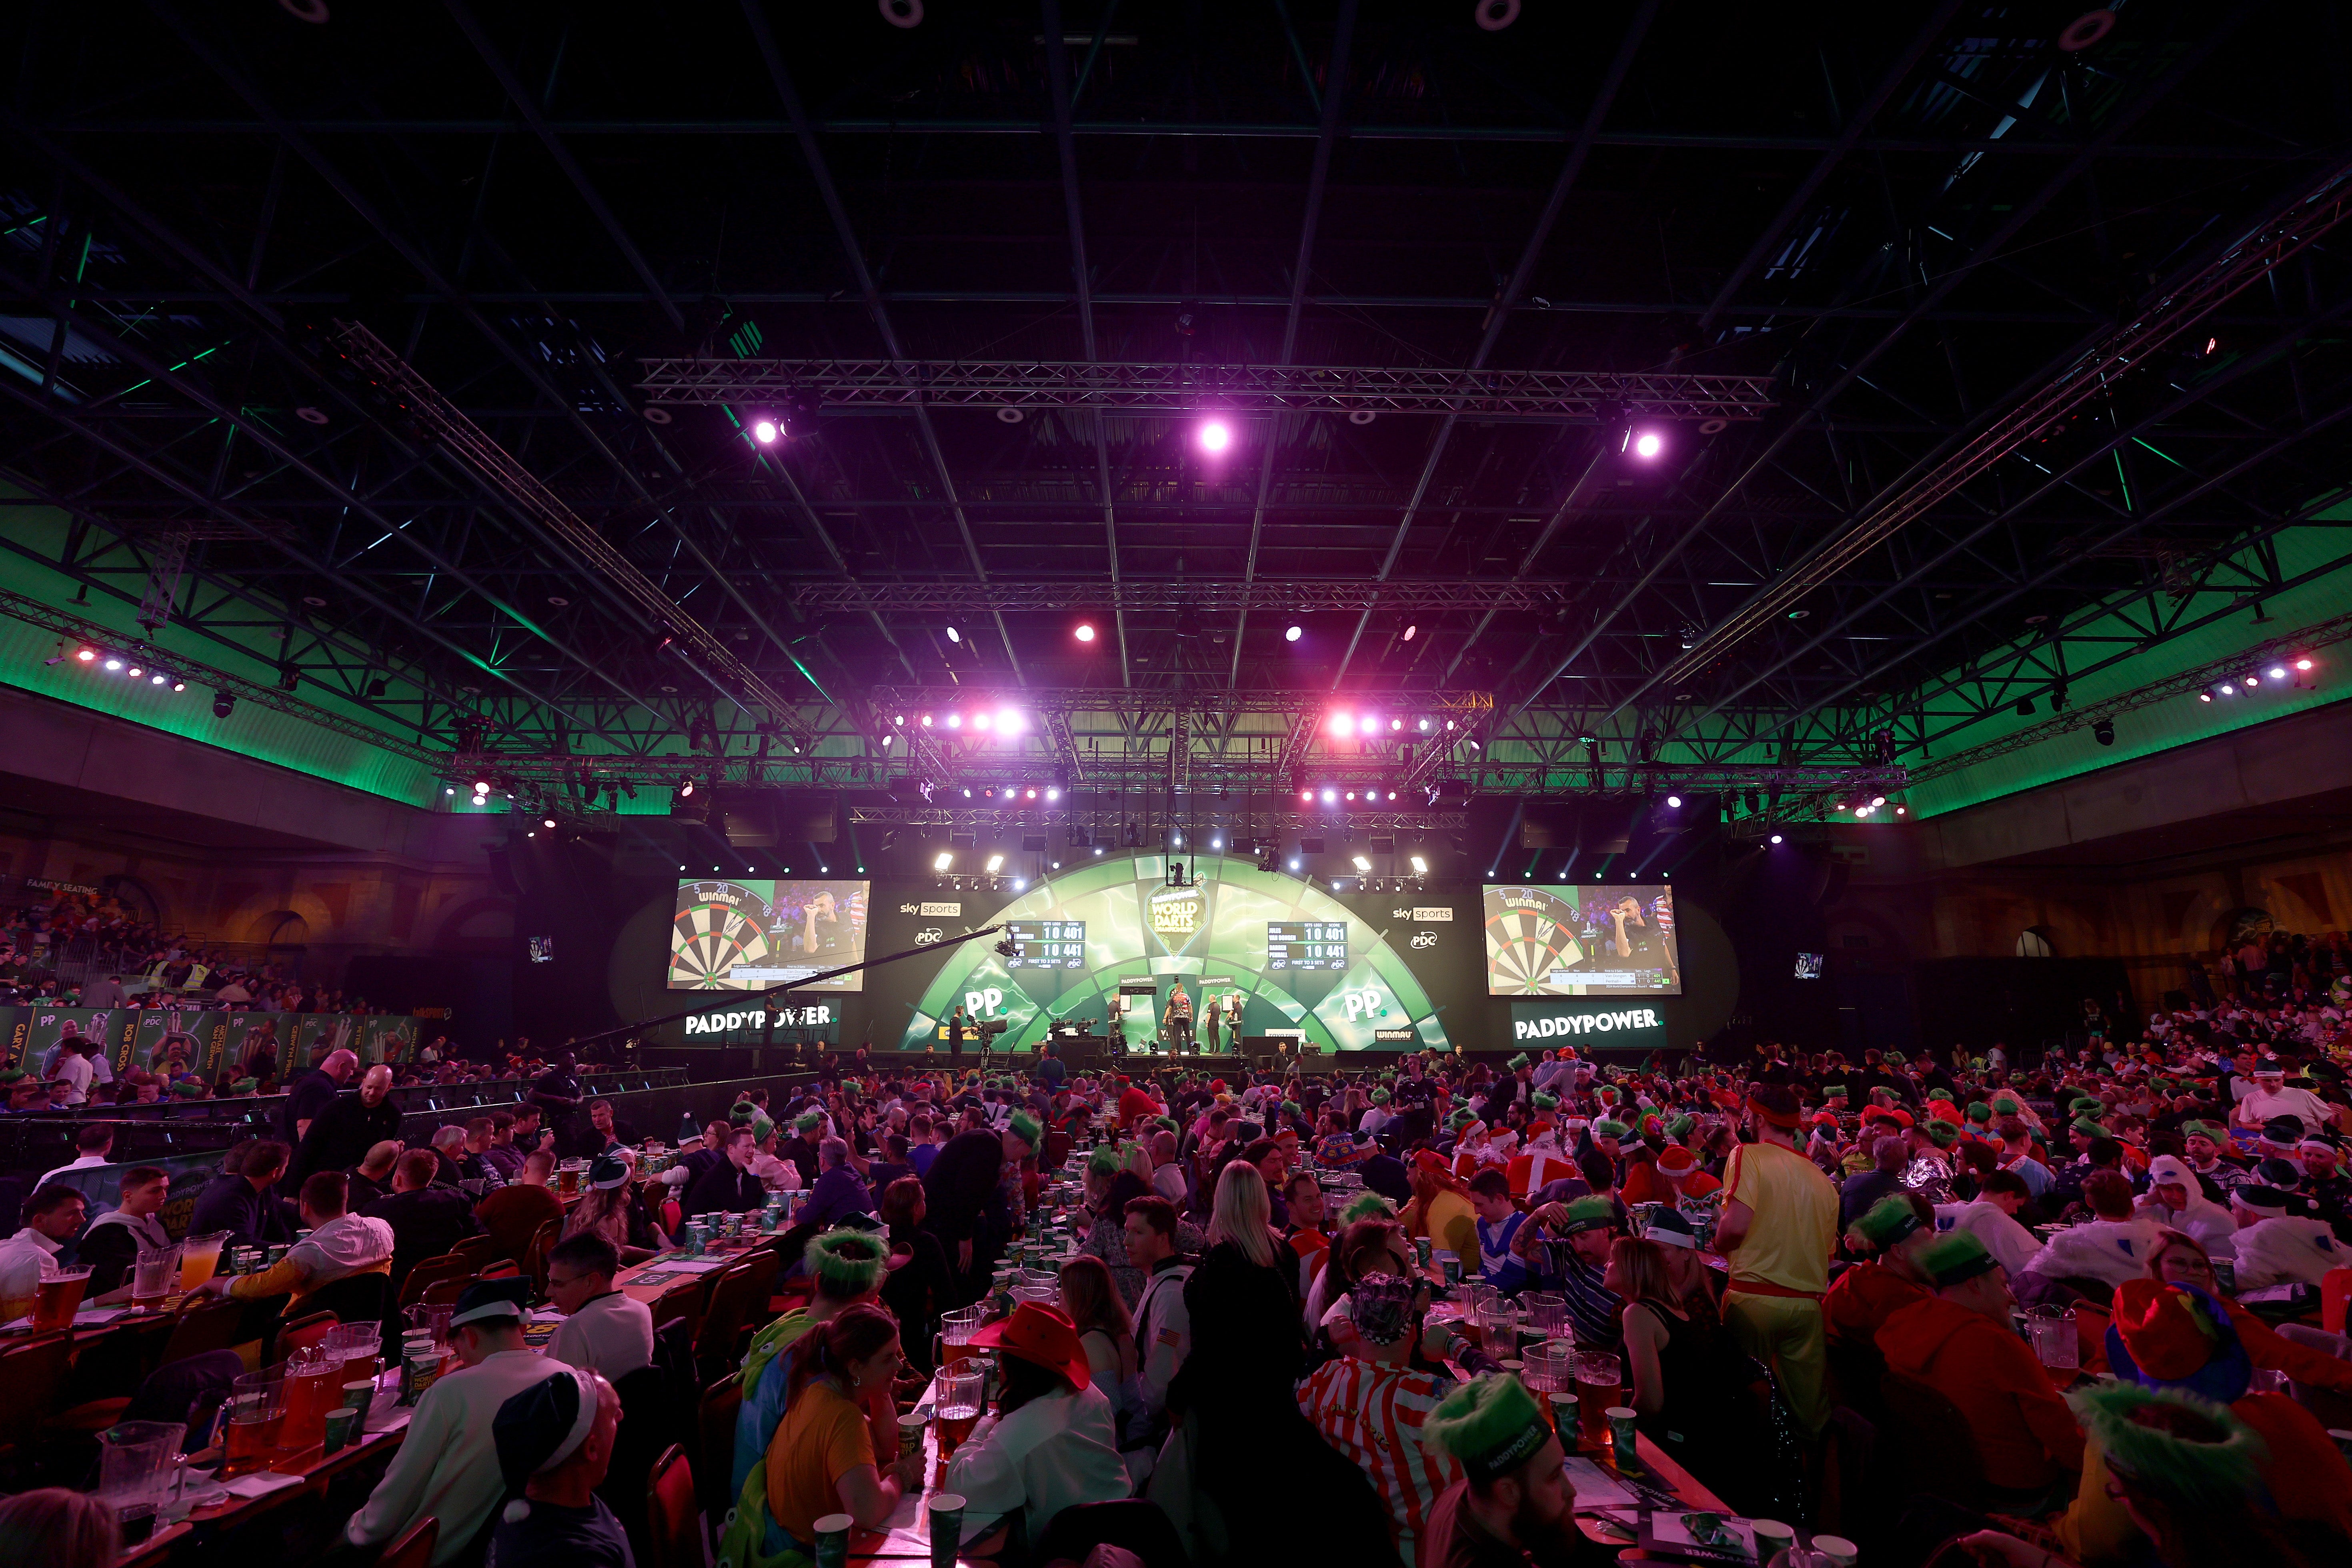 The opening night of the World Darts Championship at Ally Pally